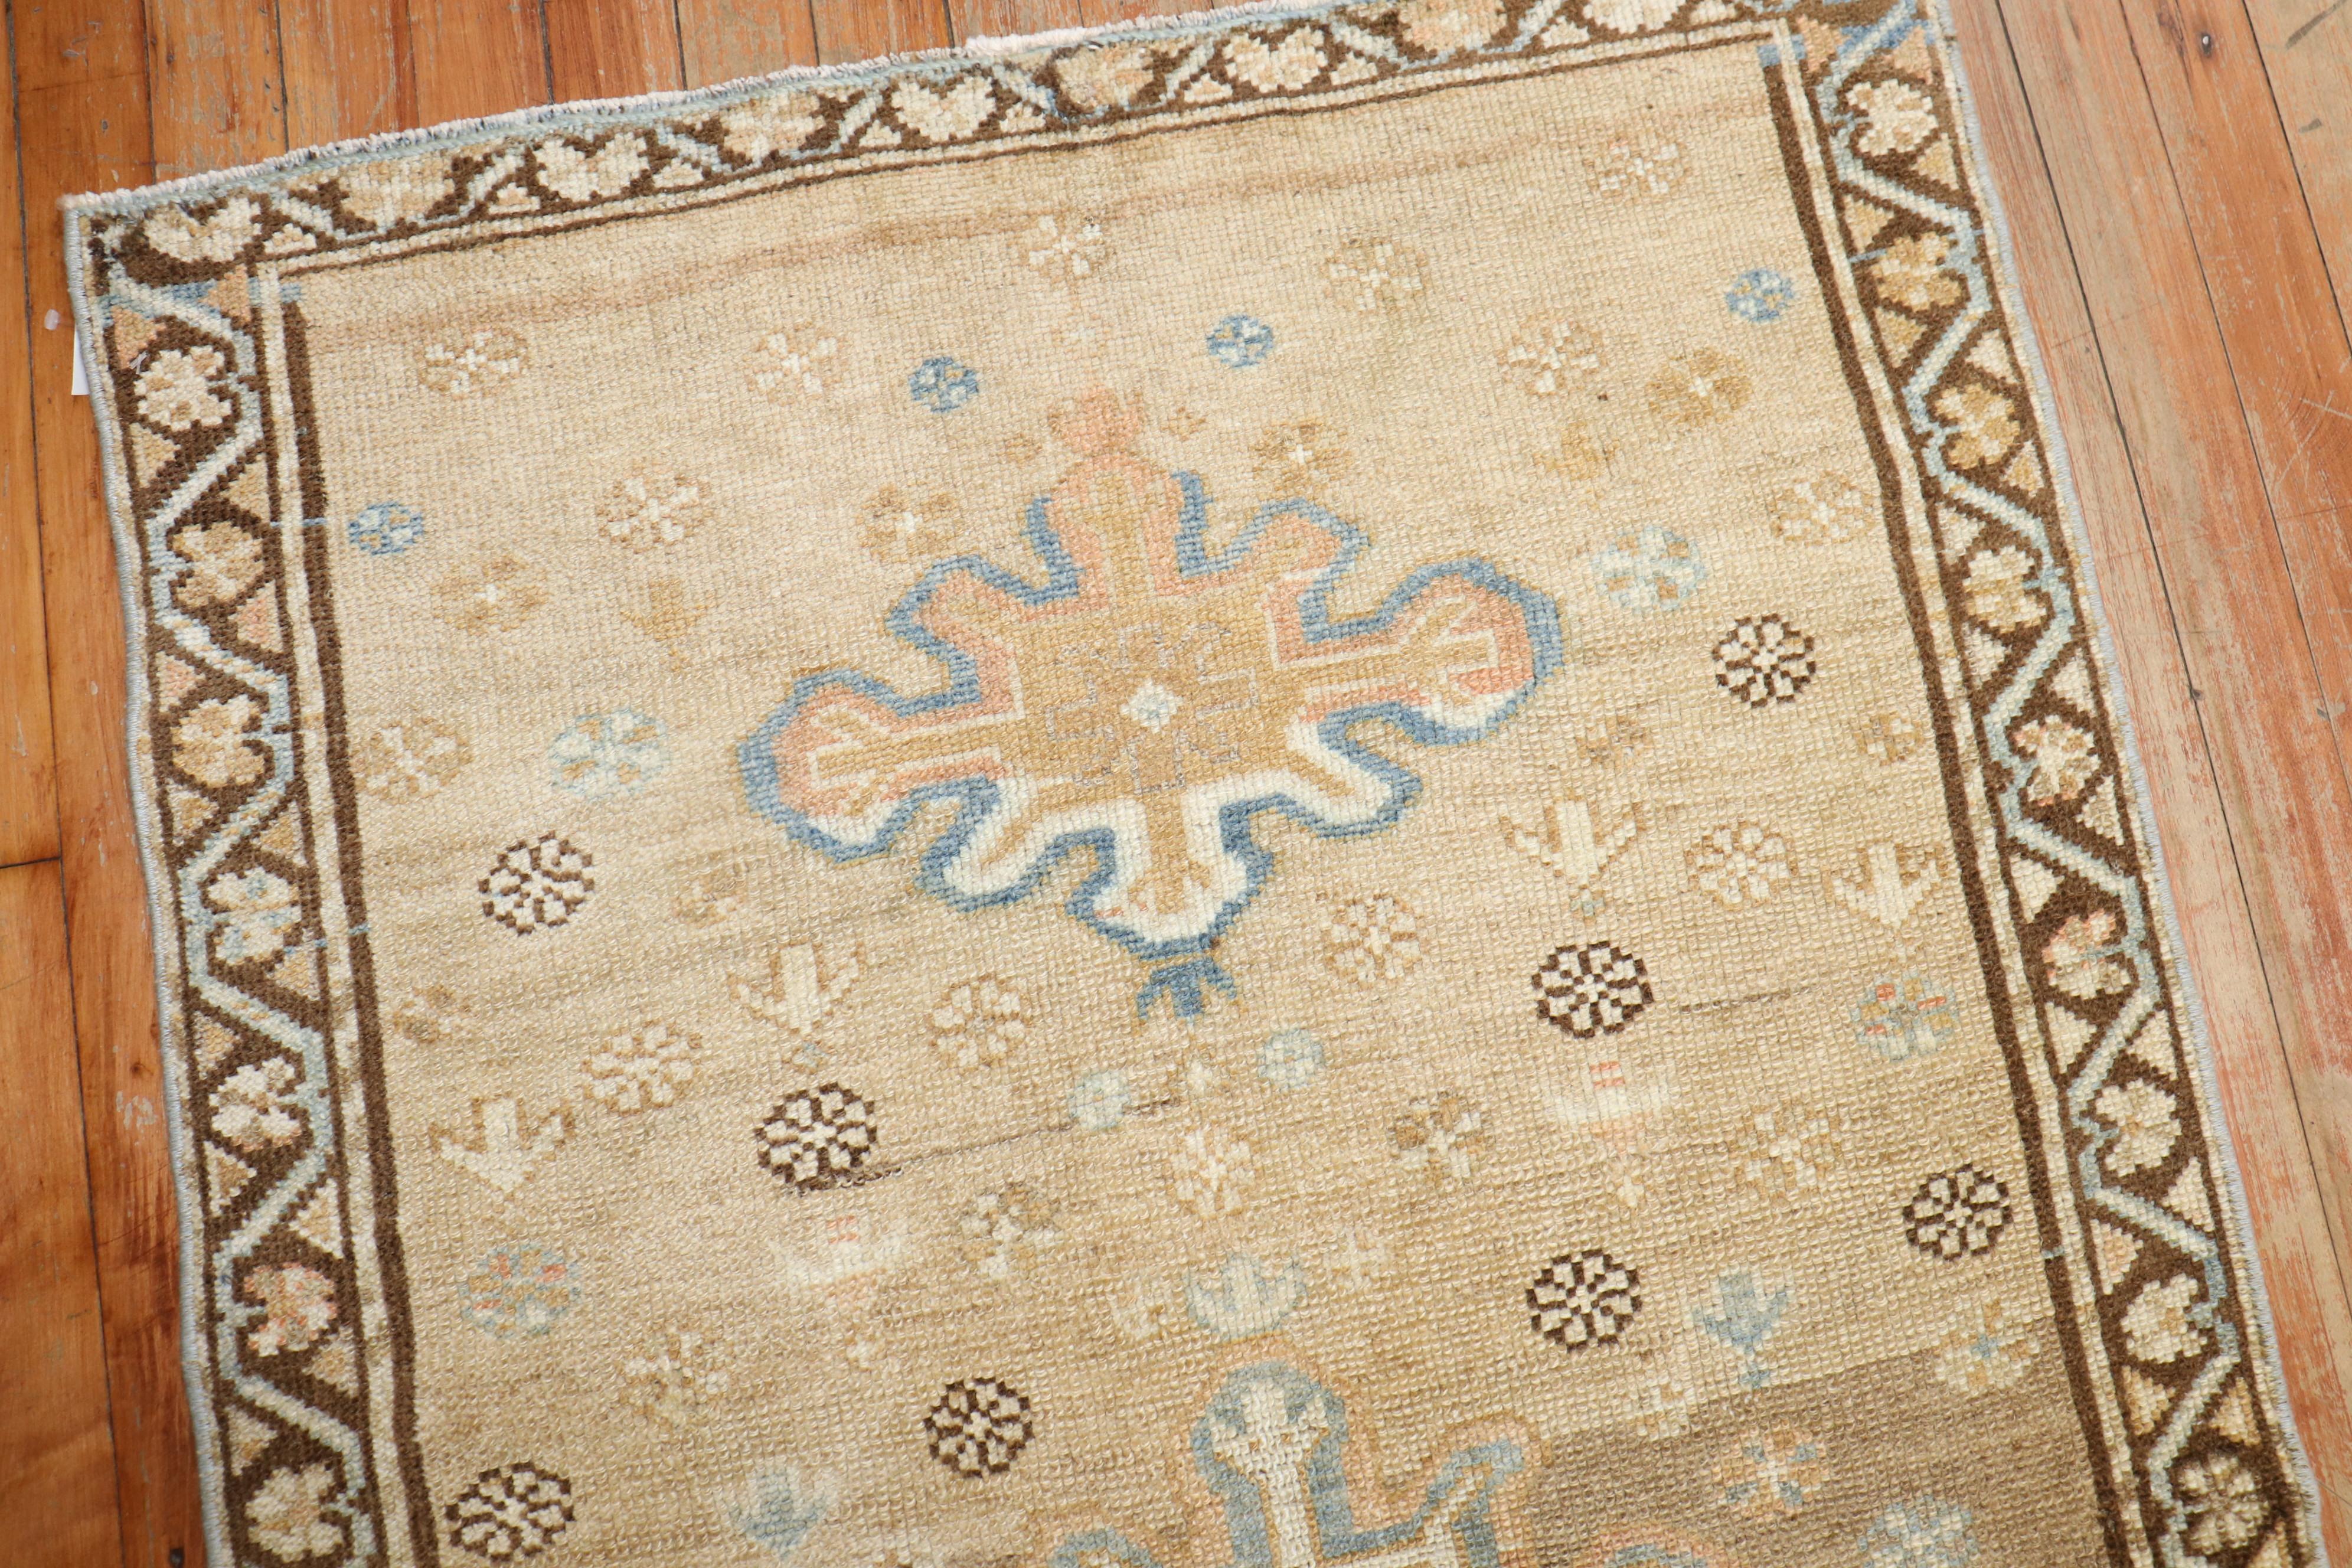 an early 20th century persian serab light camel field scatter size rug

Measures: 2'8'' x 4'7''